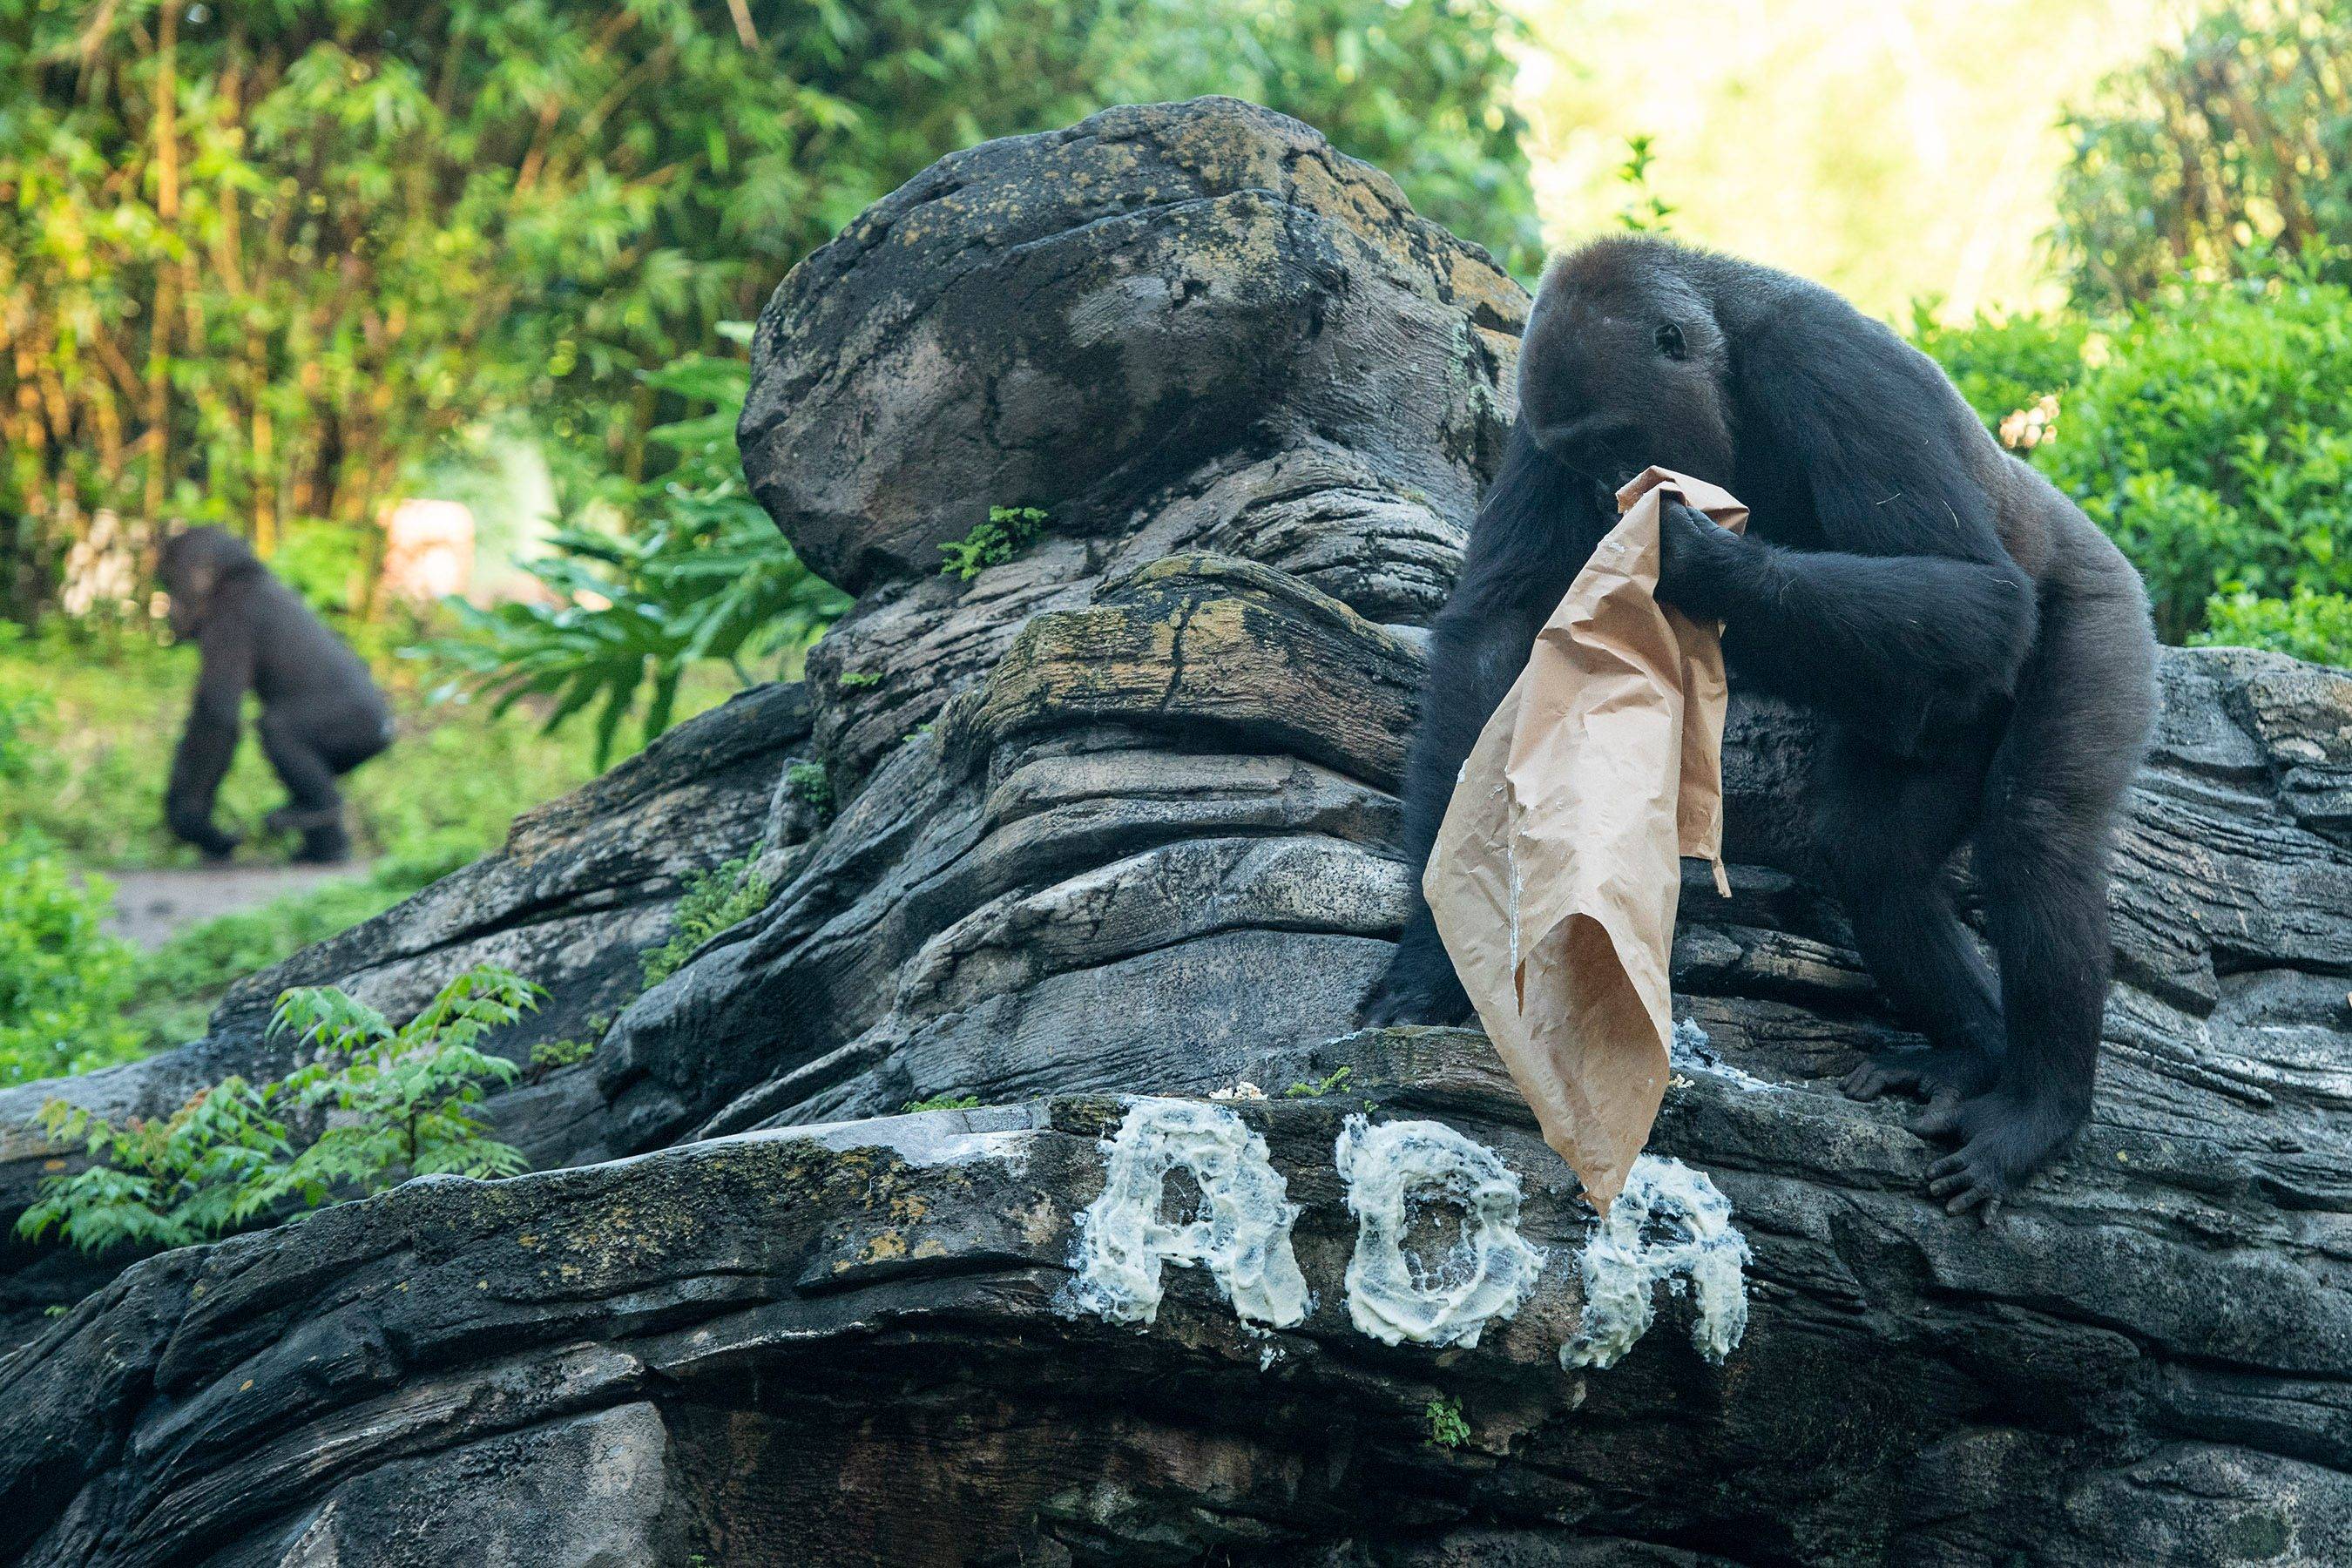 Ada's name revealed by Gorillas